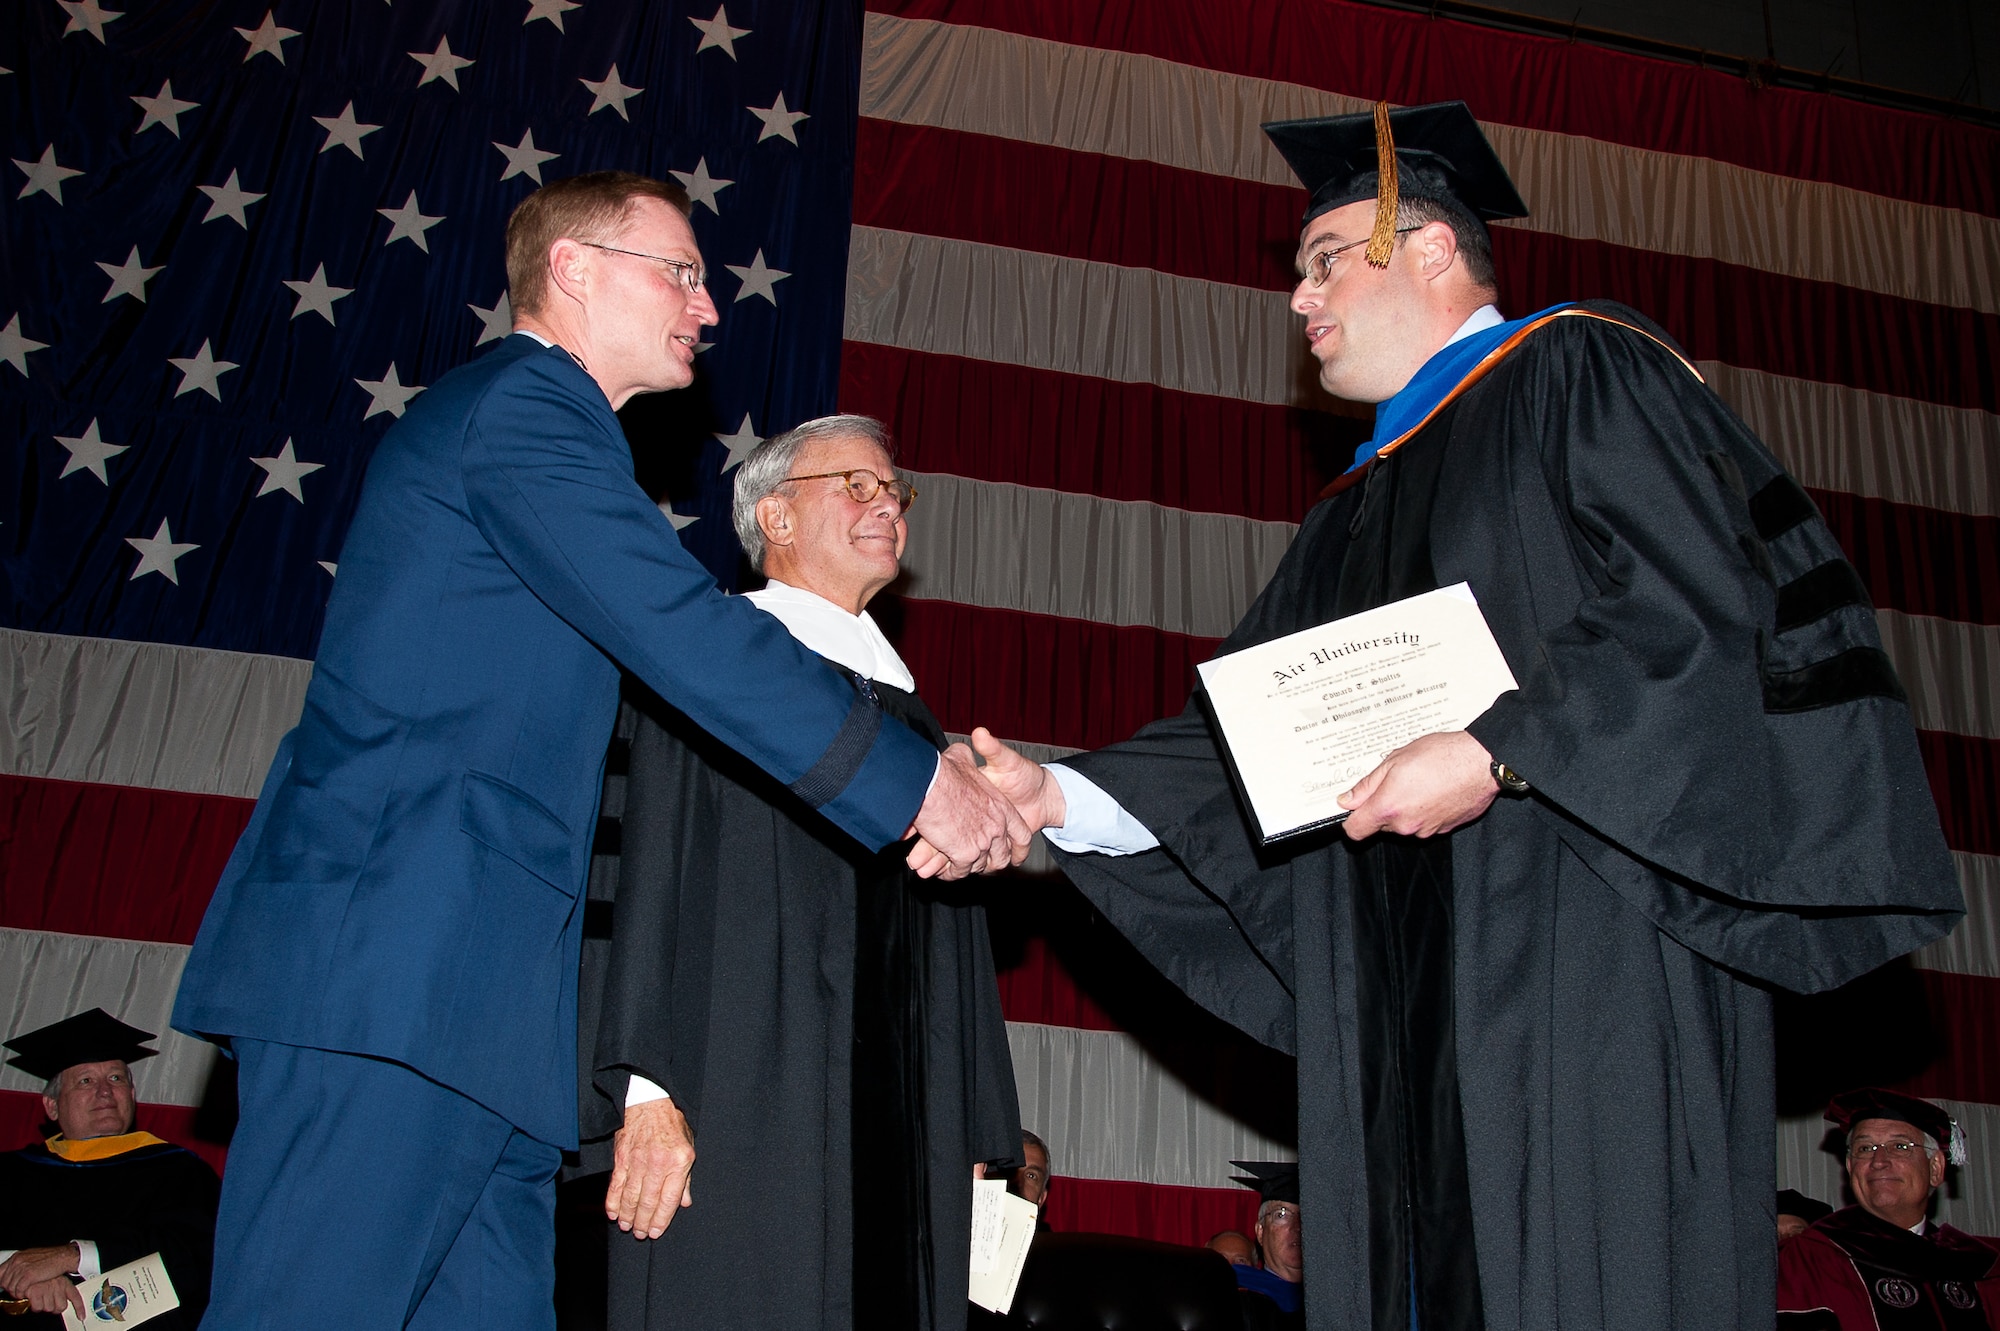 Lt. Col. Tadd Sholtis, right, deputy director of public affairs at Headquarters Air Combat Command at Langley AFB, Va., is presented the Air University's first Maxwell-conferred doctorate degree Monday by Lt. Gen. David Fadok, right, as AU honorary degree recipient Tom Brokaw looks on. (Air Force photo/Melanie Rodgers Cox)